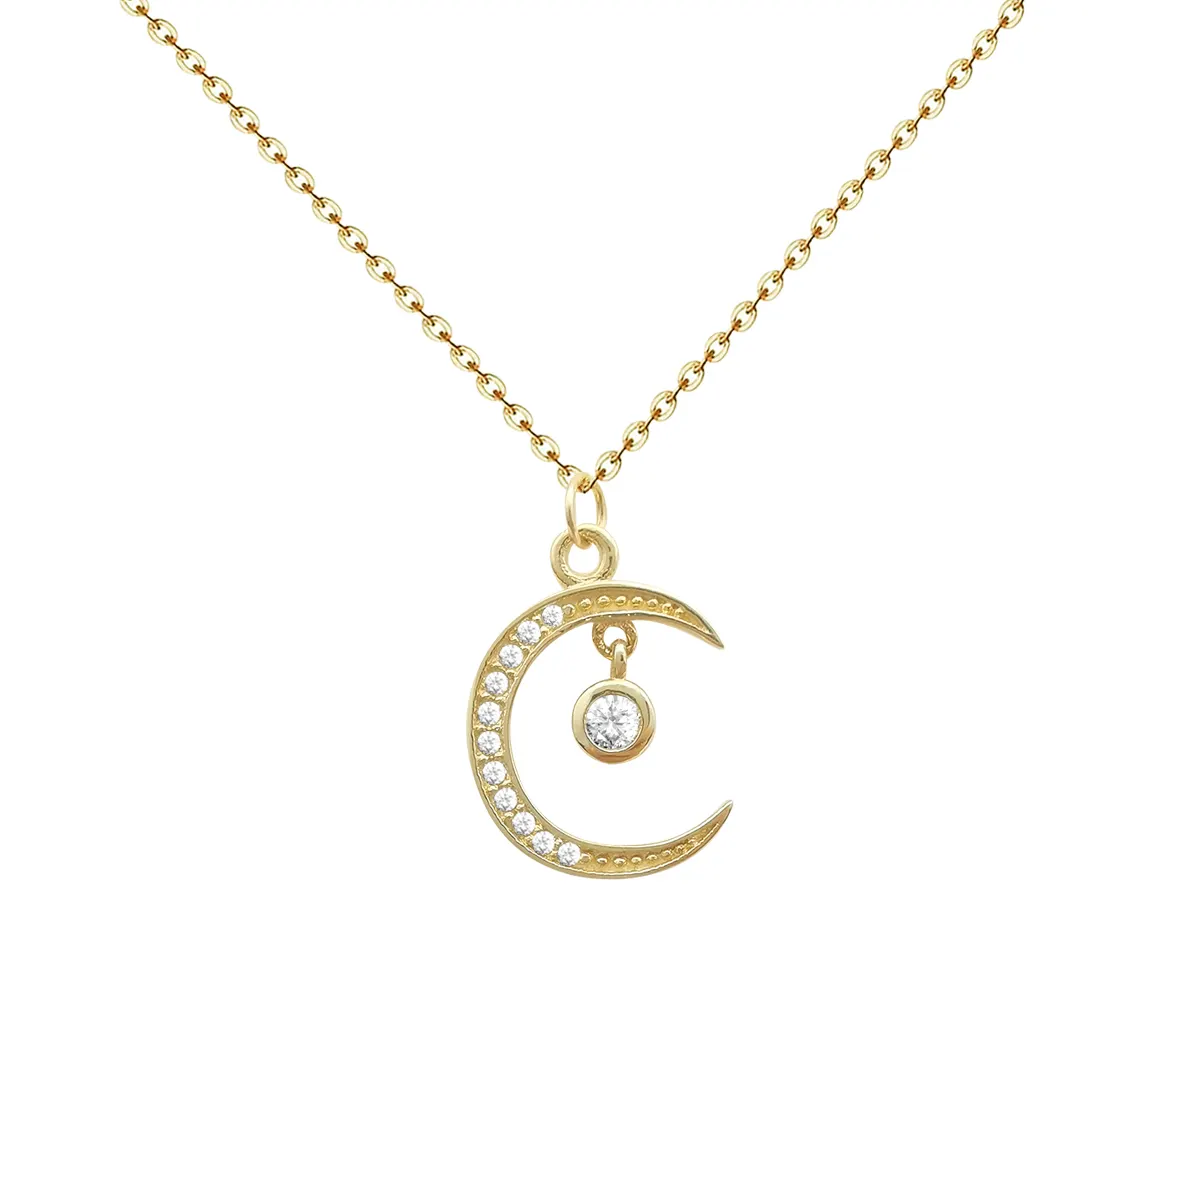 Pendant Chain Necklace Jewelry Gold Cubic Zirconia Fashion Korean Style Moon Shape 14K Yellow Link Chain Necklaces Wedding Gift